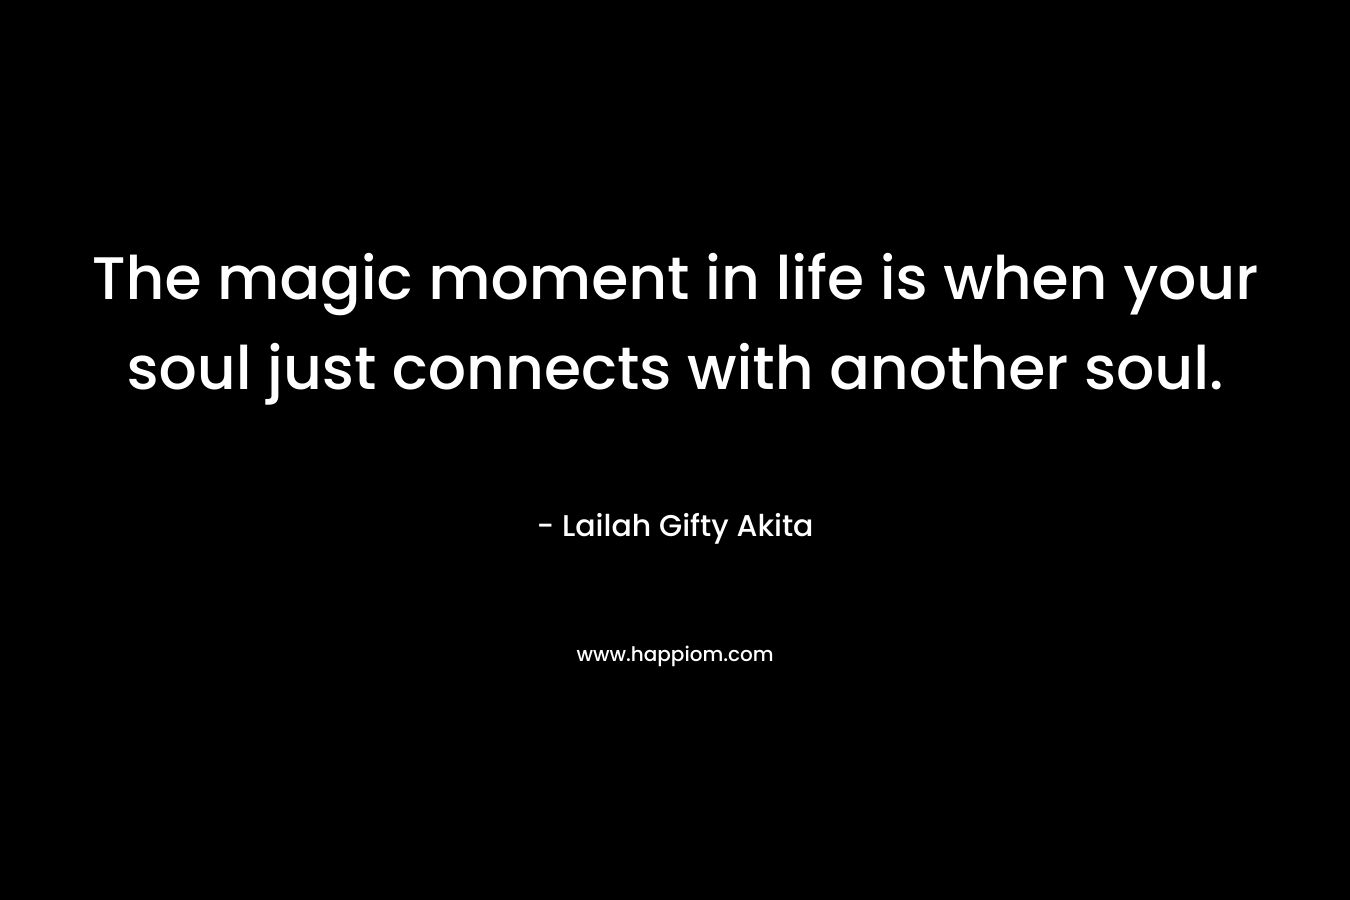 The magic moment in life is when your soul just connects with another soul.